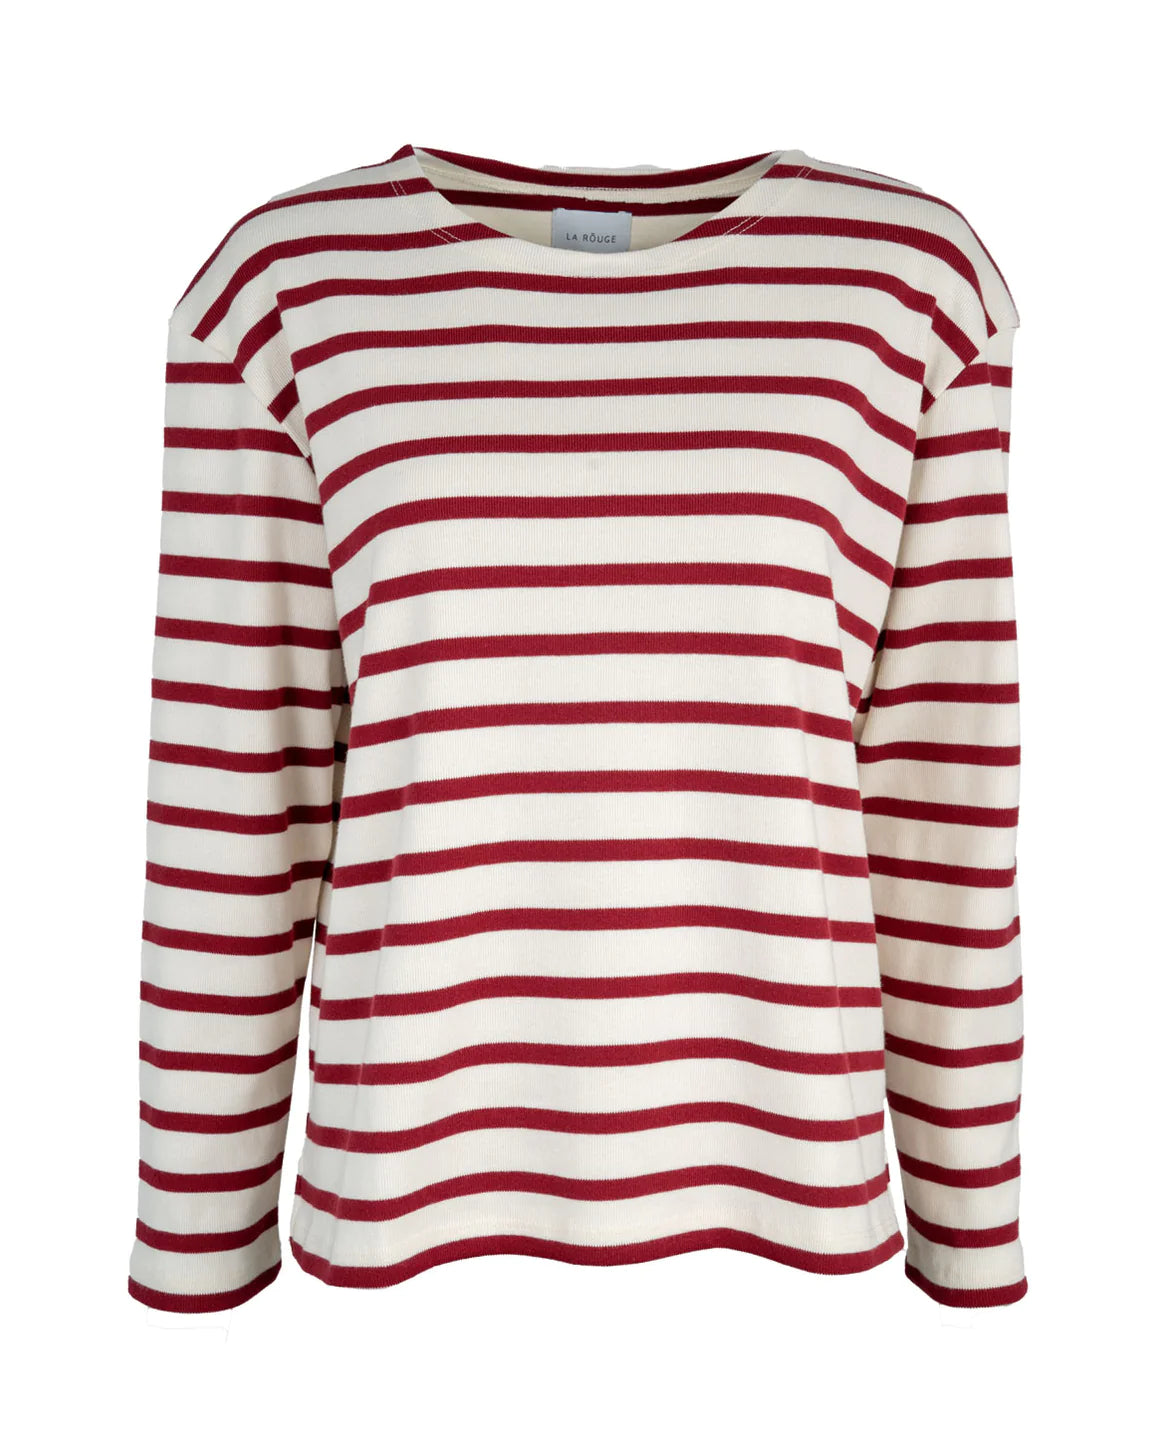 Claudia Sailor Blouse - Off White / Red Stripe